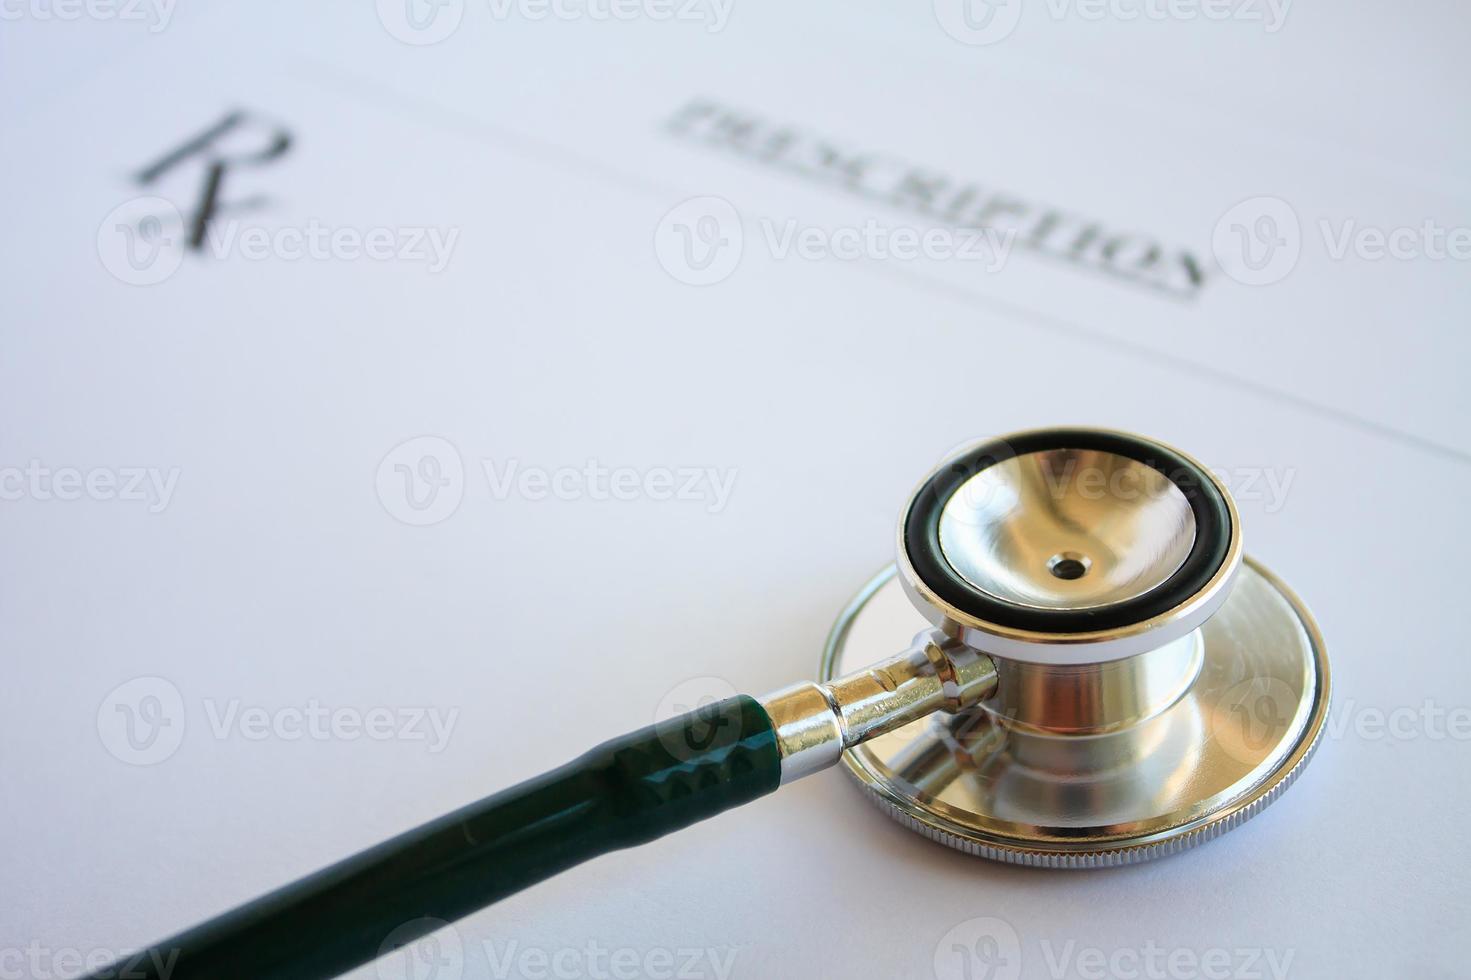 Blank medical prescription with stethoscope photo